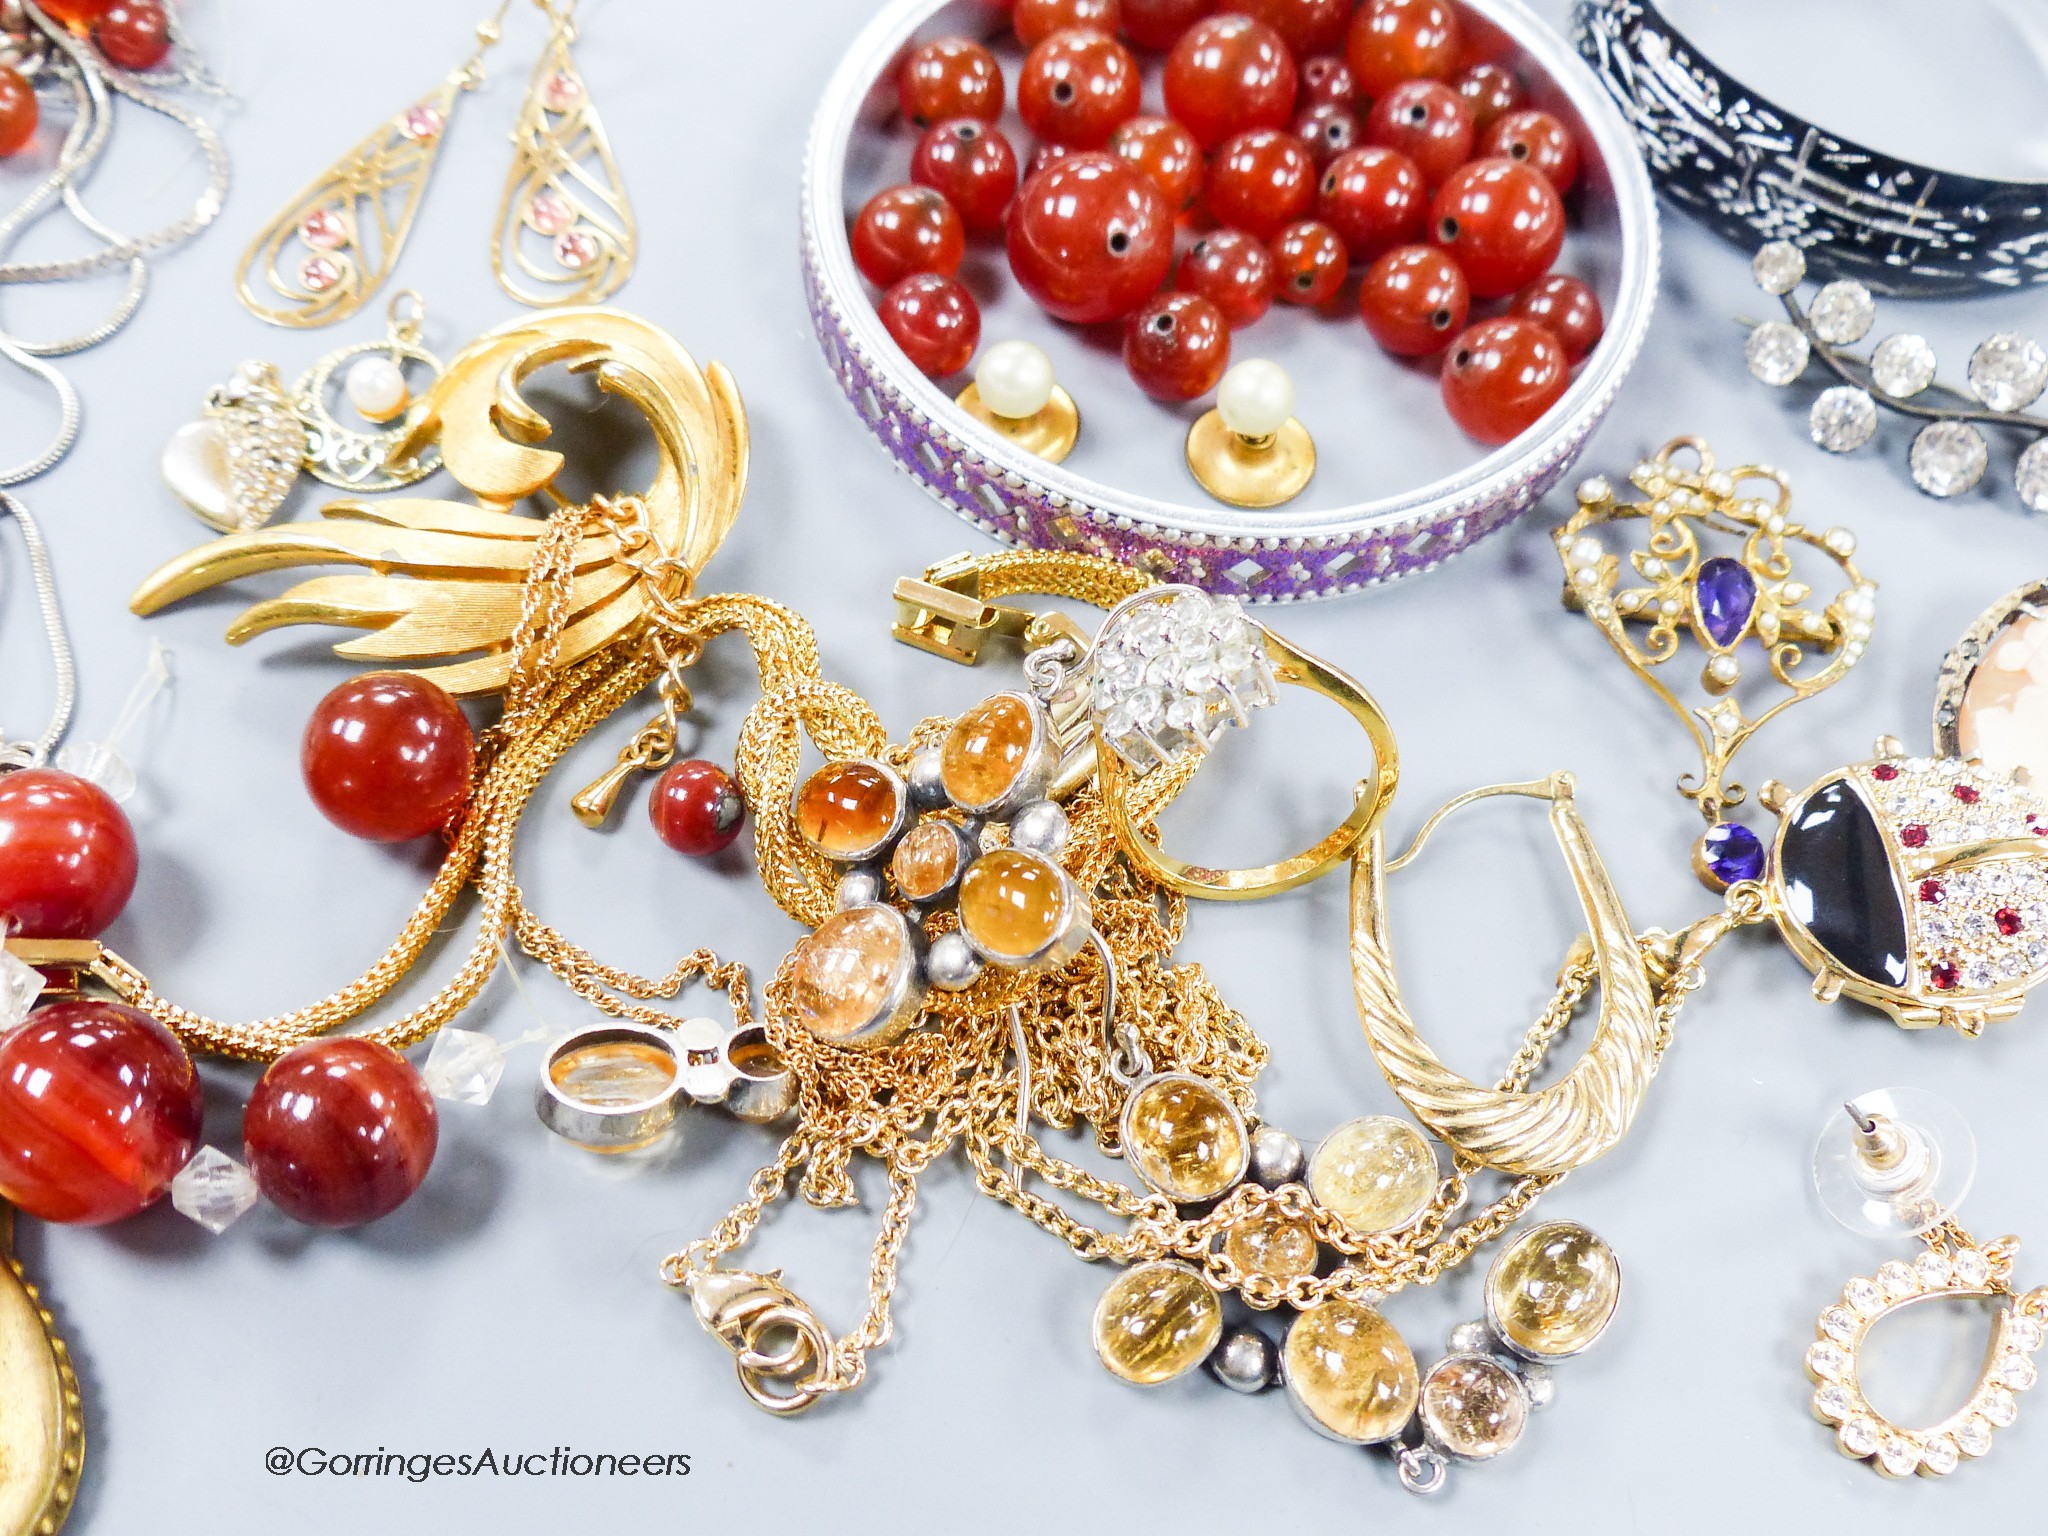 A group of mixed jewellery including yellow metal pendant, a micro mosaic banjo brooch, etc.